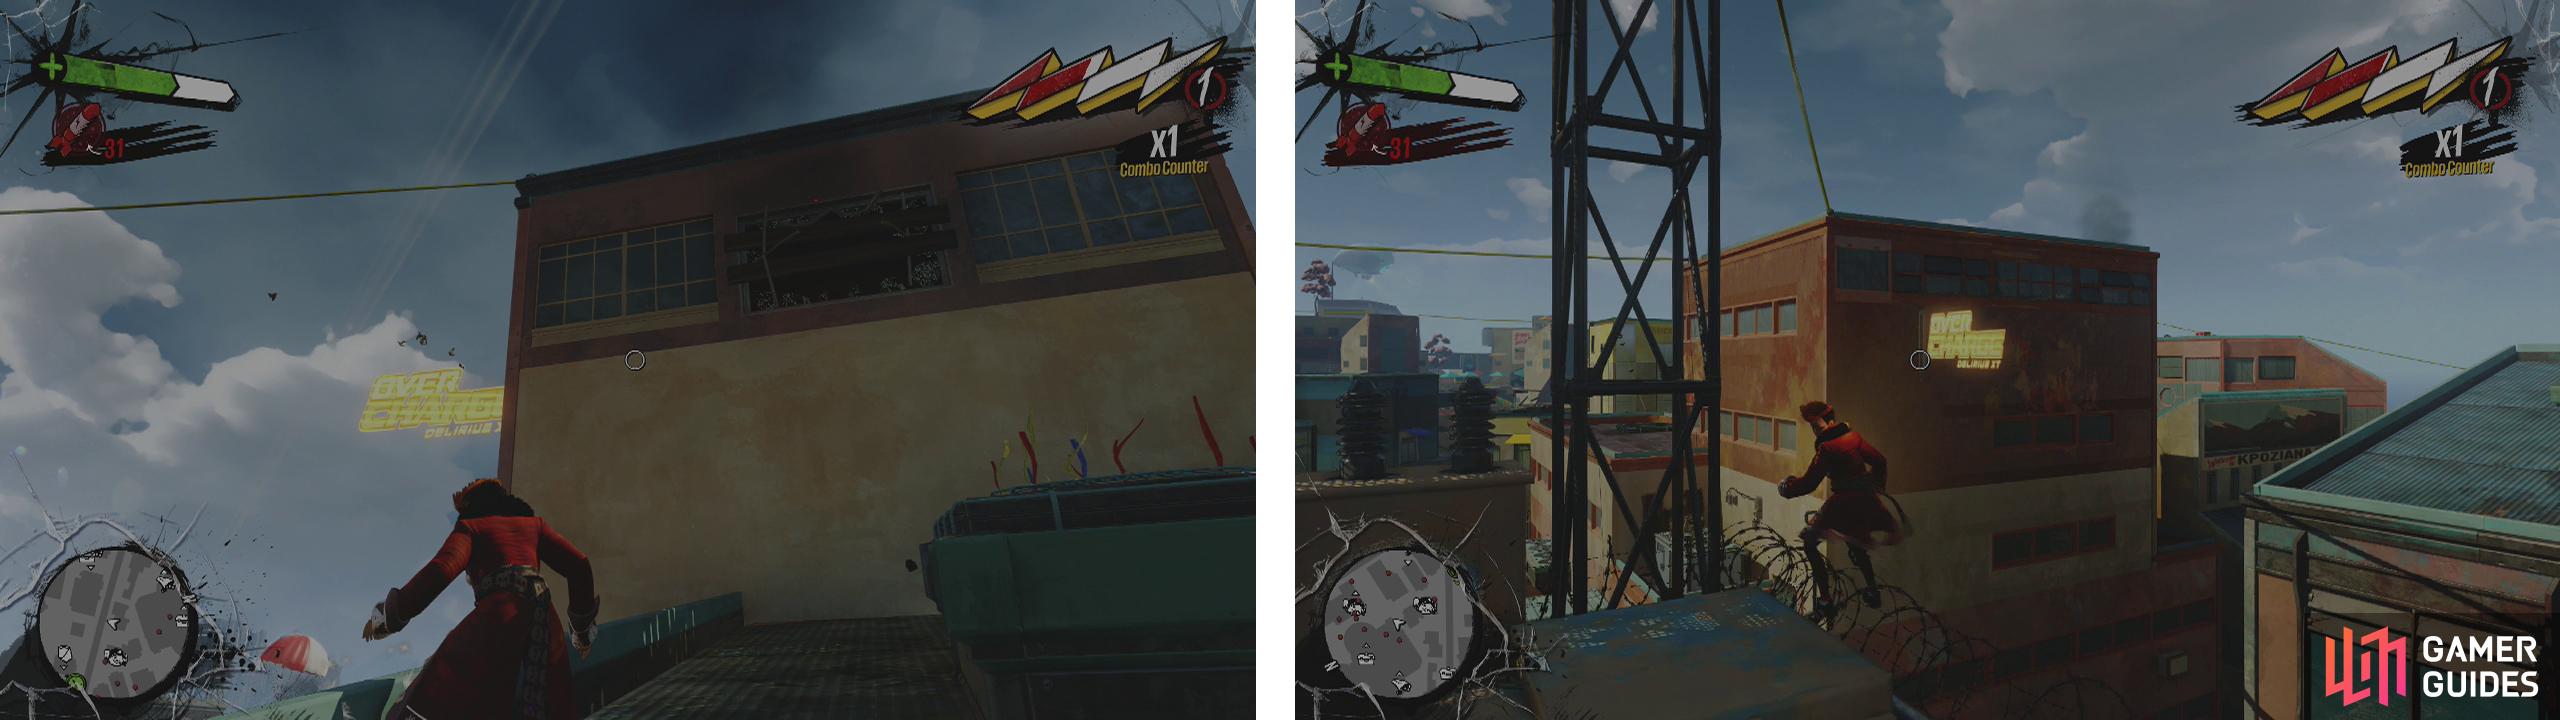 Combos and Style Meter - Sunset Overdrive Guide - IGN